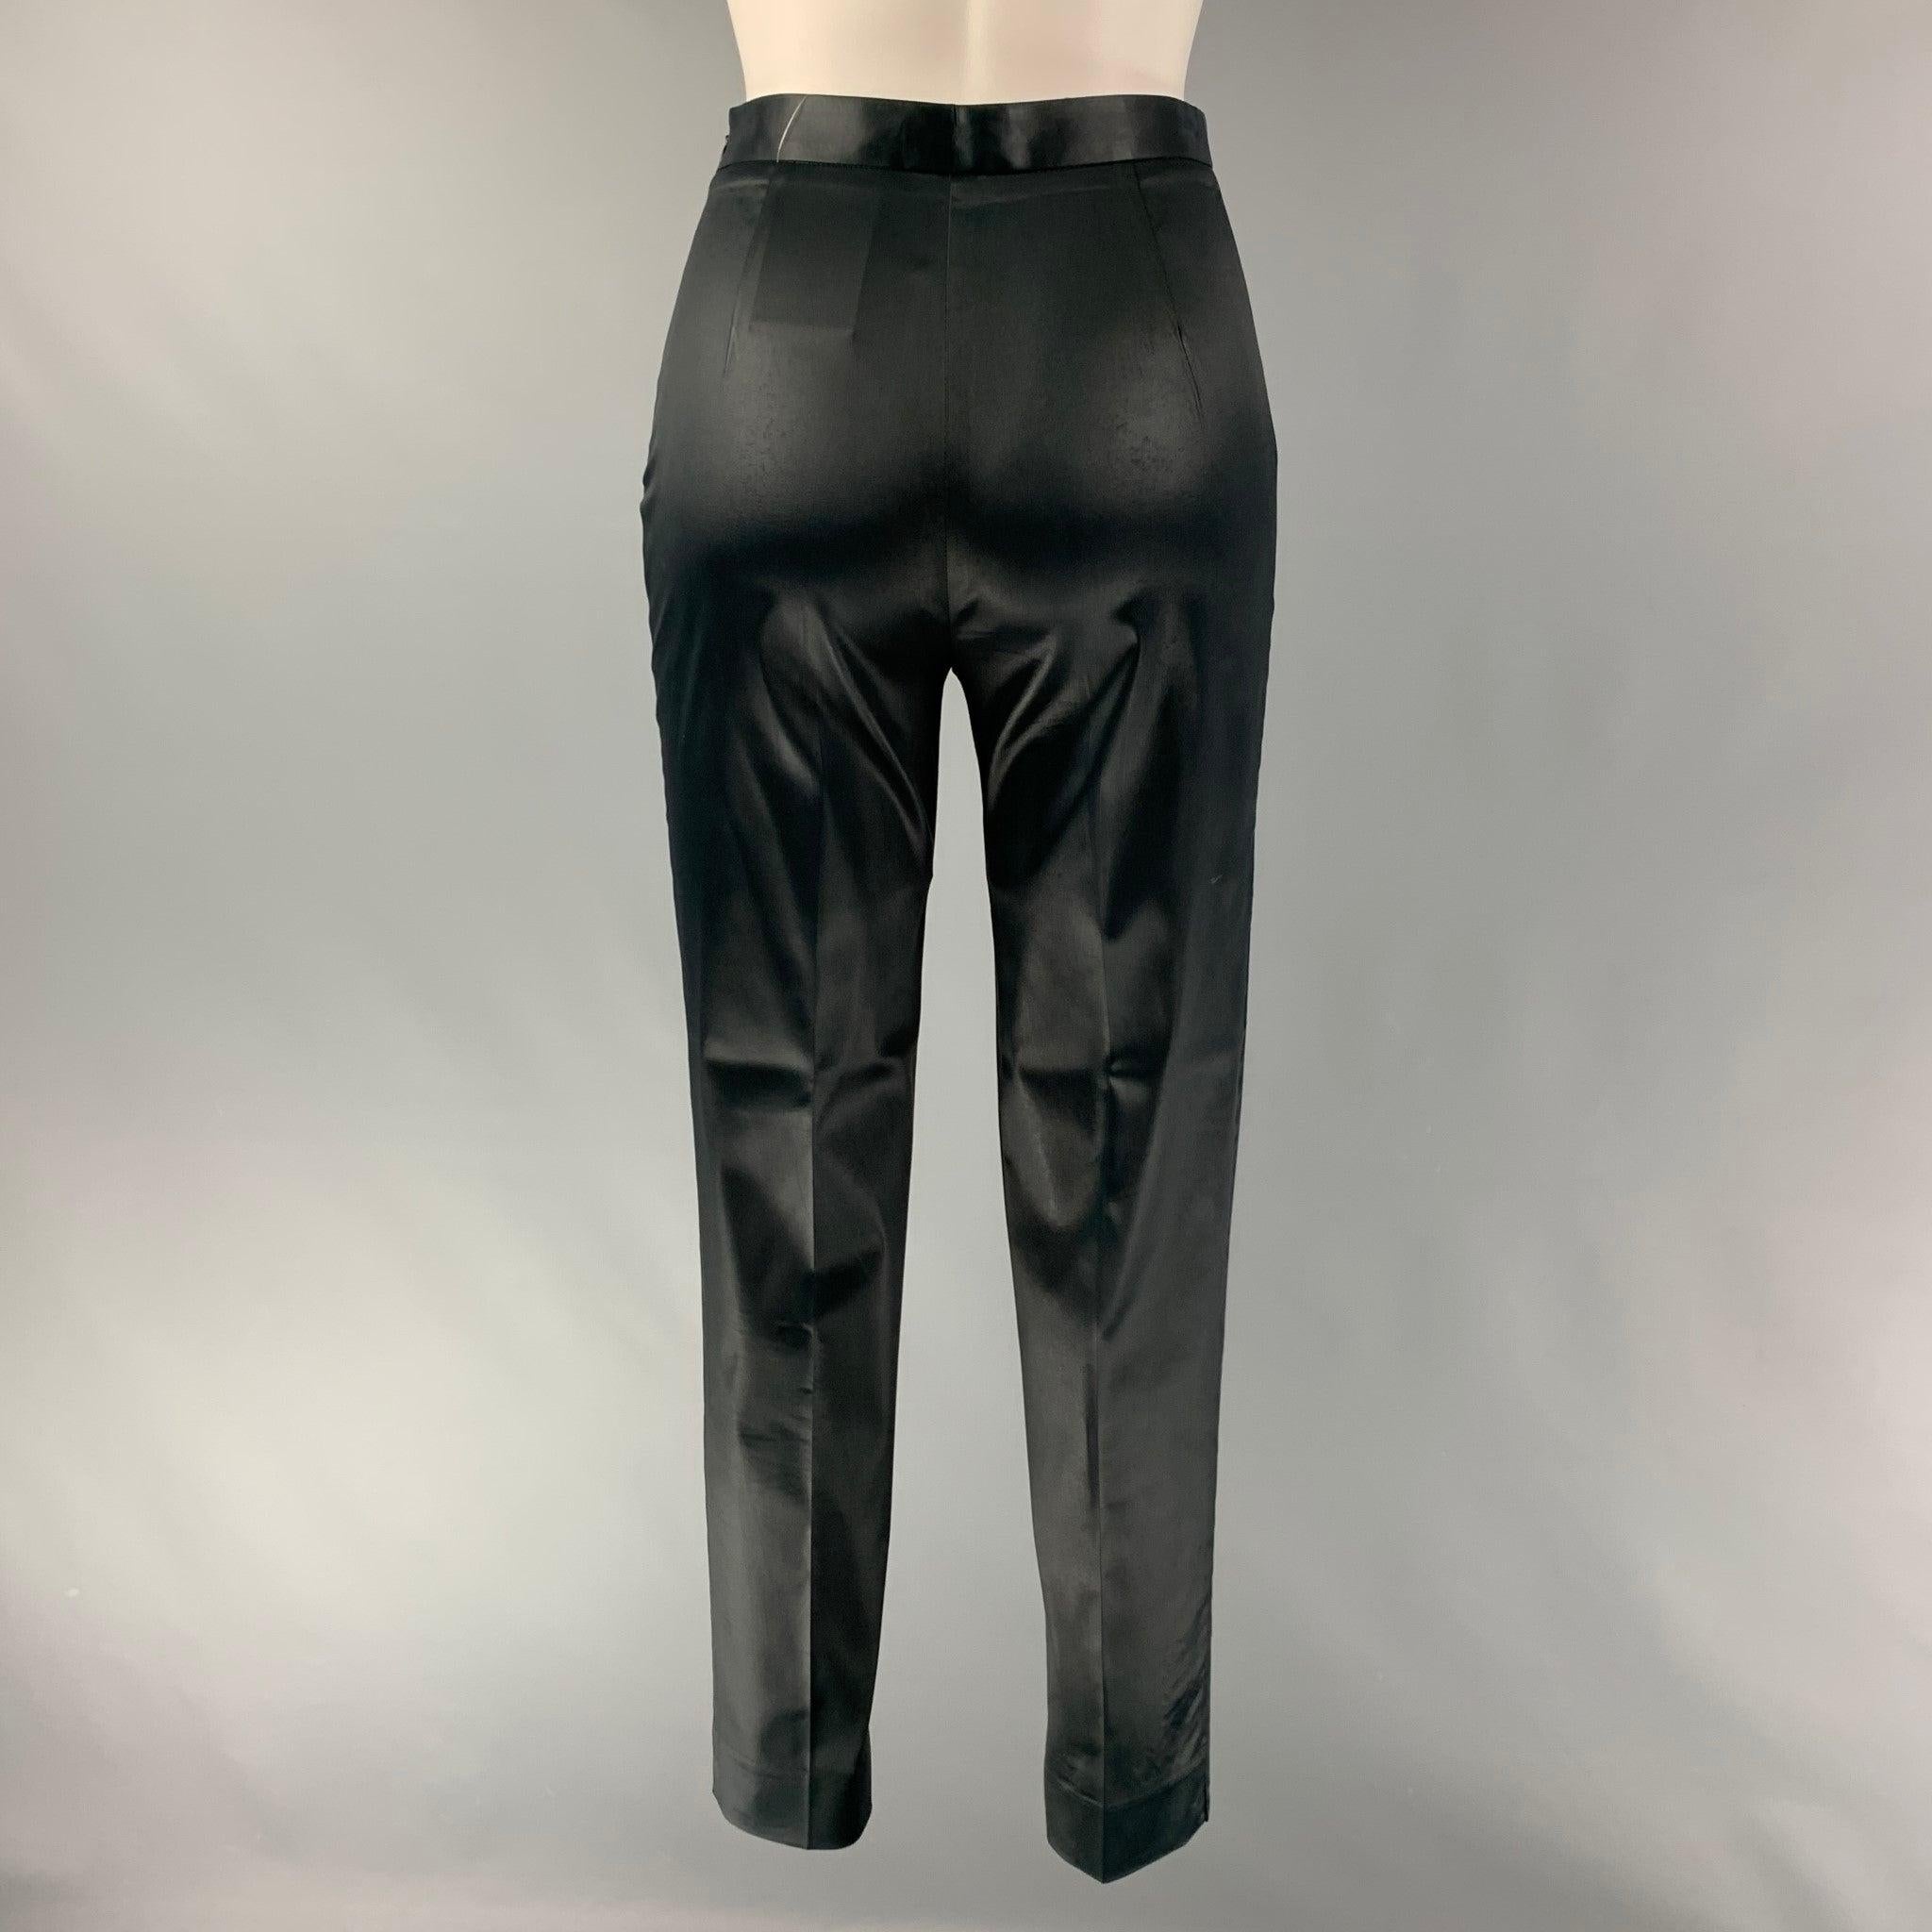 BALMAIN dress pants comes in a black acetate blend featuring a straight leg, invisible side seam zip up closure. Made in Italy.Very Good Pre-Owned Condition. Minor Signs of Wear. 

Marked:   IT 40 

Measurements: 
  Waist: 25 inches Rise: 11 inches